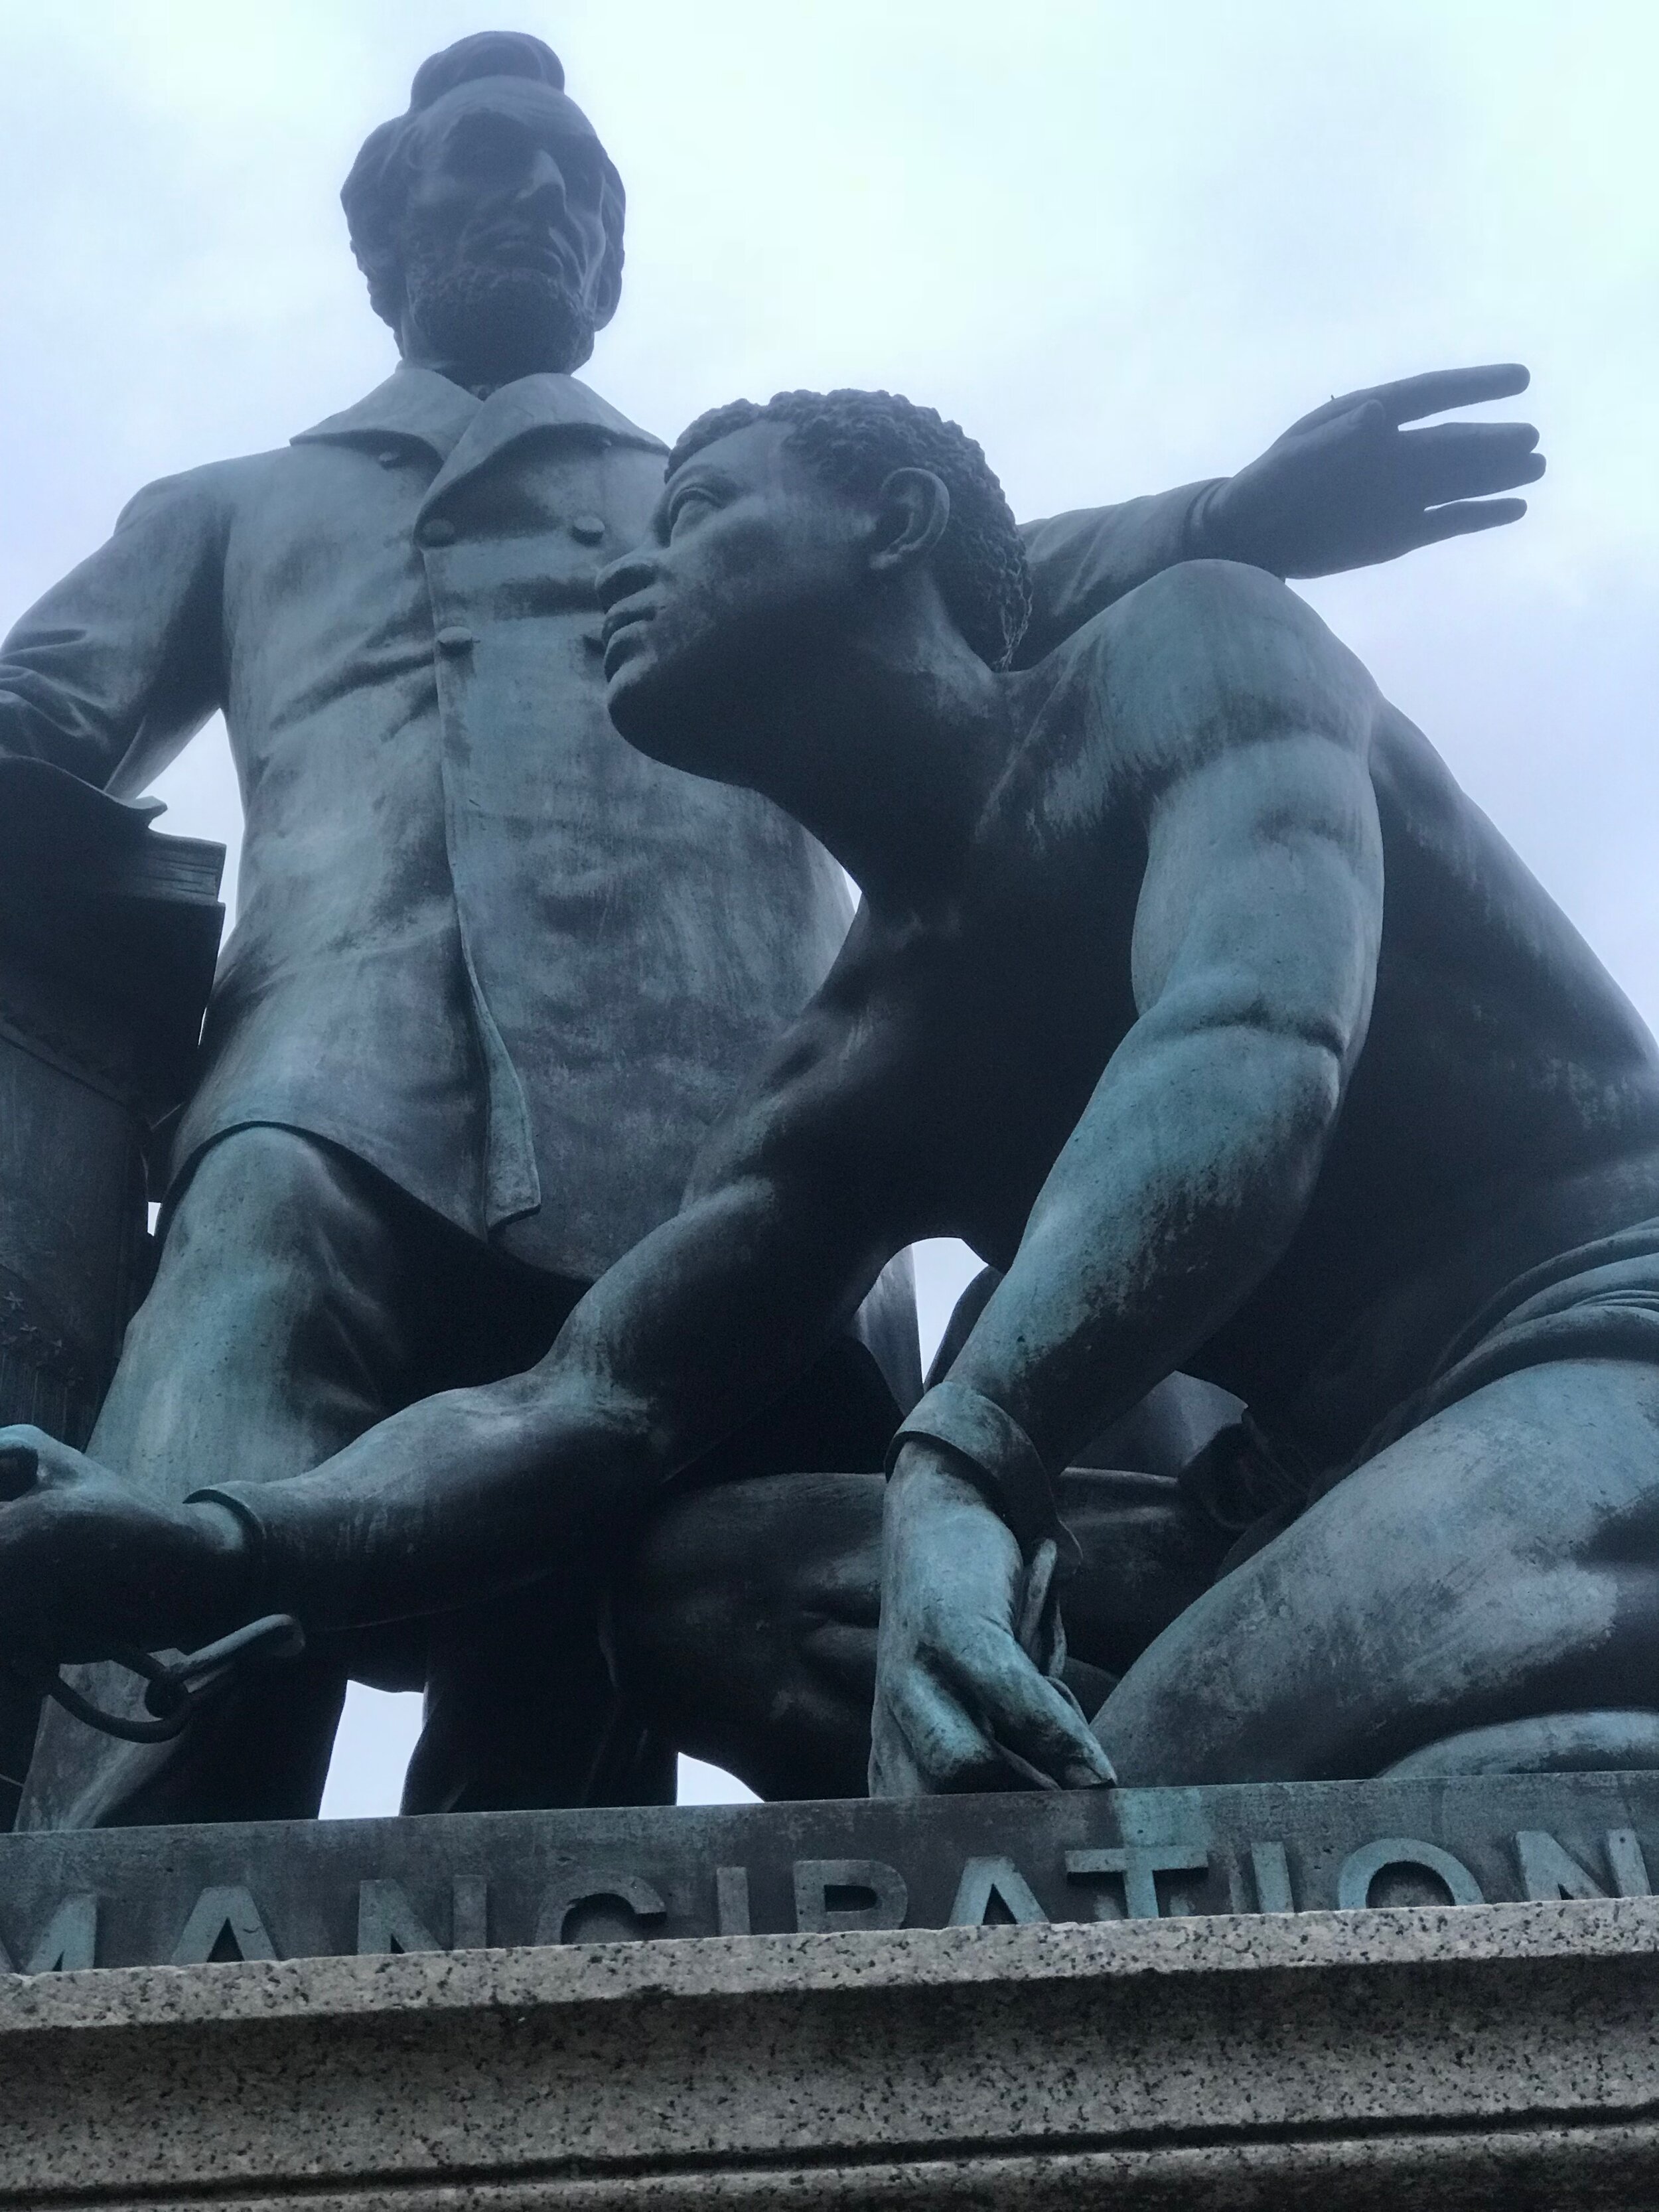  The Freedman’s Monument in Washington DC, along with a copy in Boston, have come under fire for its depiction of an enslaved person rising from his knees with Lincoln’s help. The Boston Arts Commission this week voted to remove its version of the st